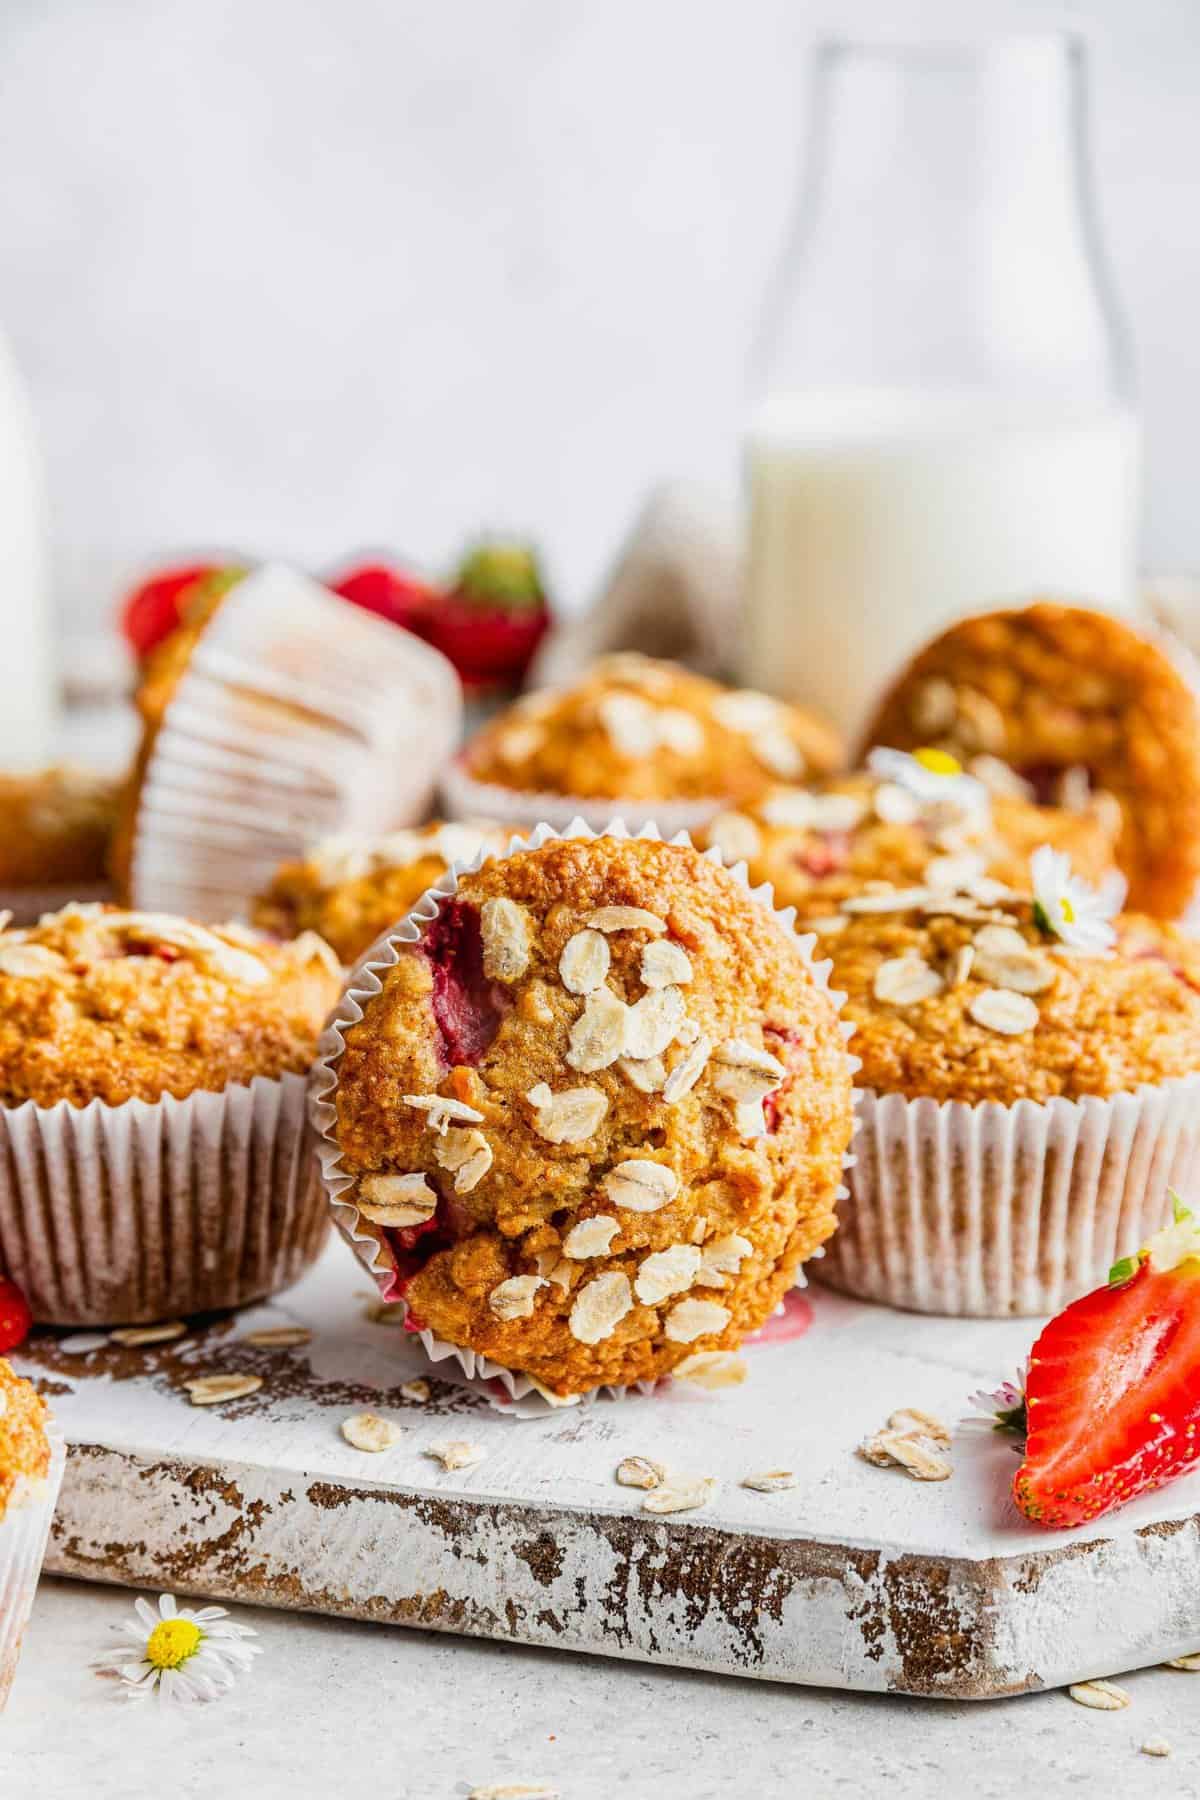 Strawberry muffins on rustic wood board